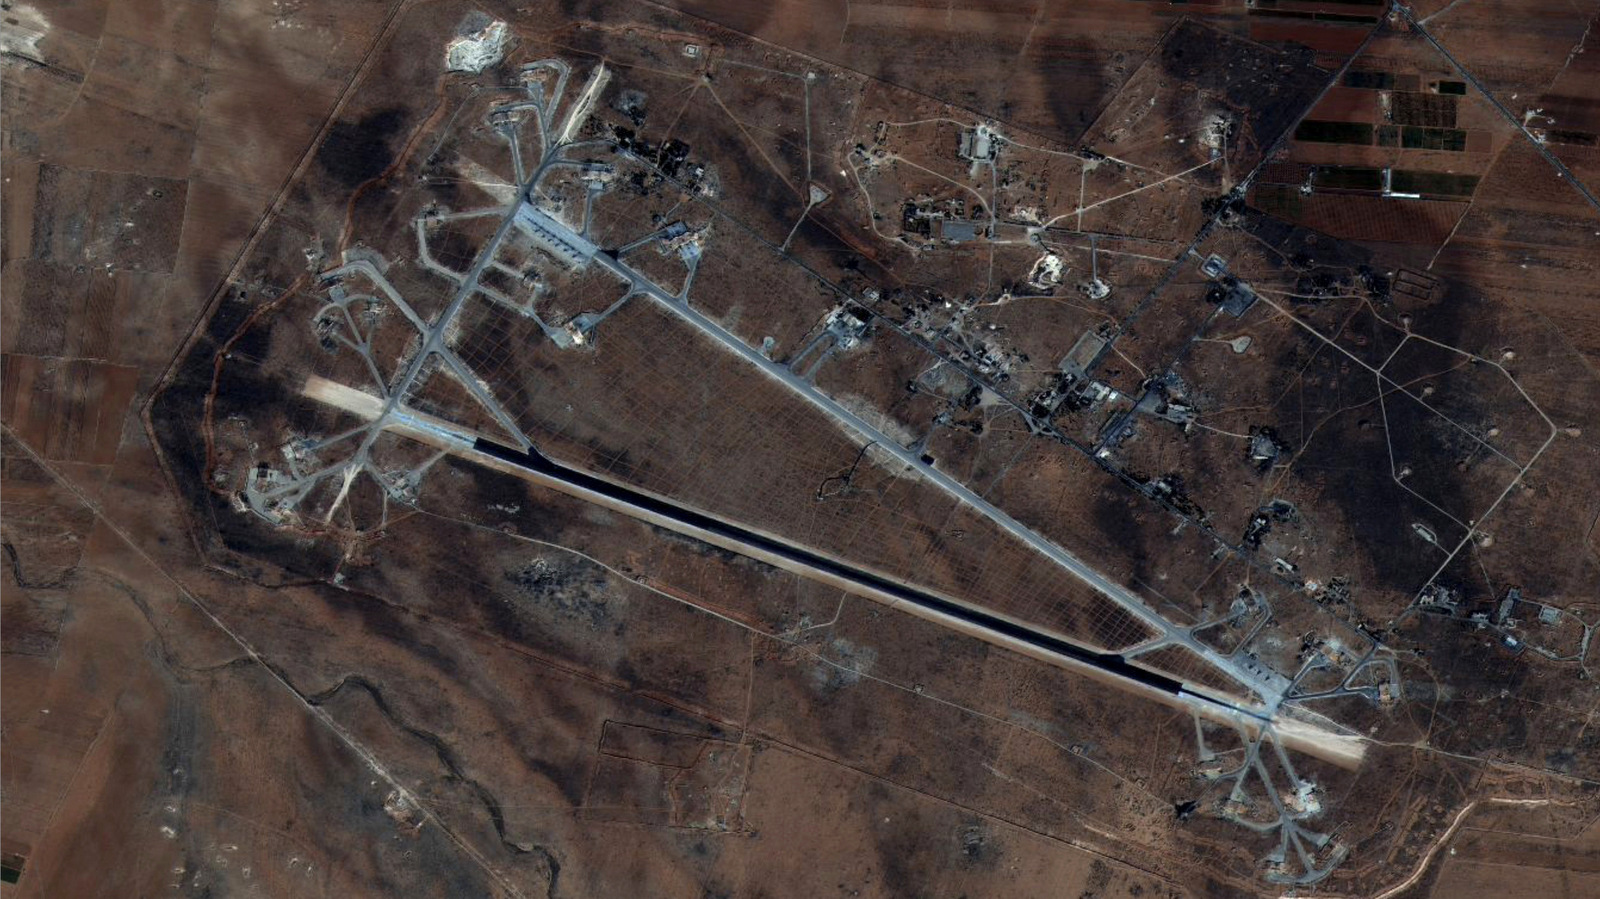 This Oct. 7, 2016 satellite image released by the U.S. Department of Defense shows Shayrat air base in Syria after it was blasted with a barrage of cruise missiles on Friday, April 7, 2017. (DigitalGlobe/U.S. DOD)